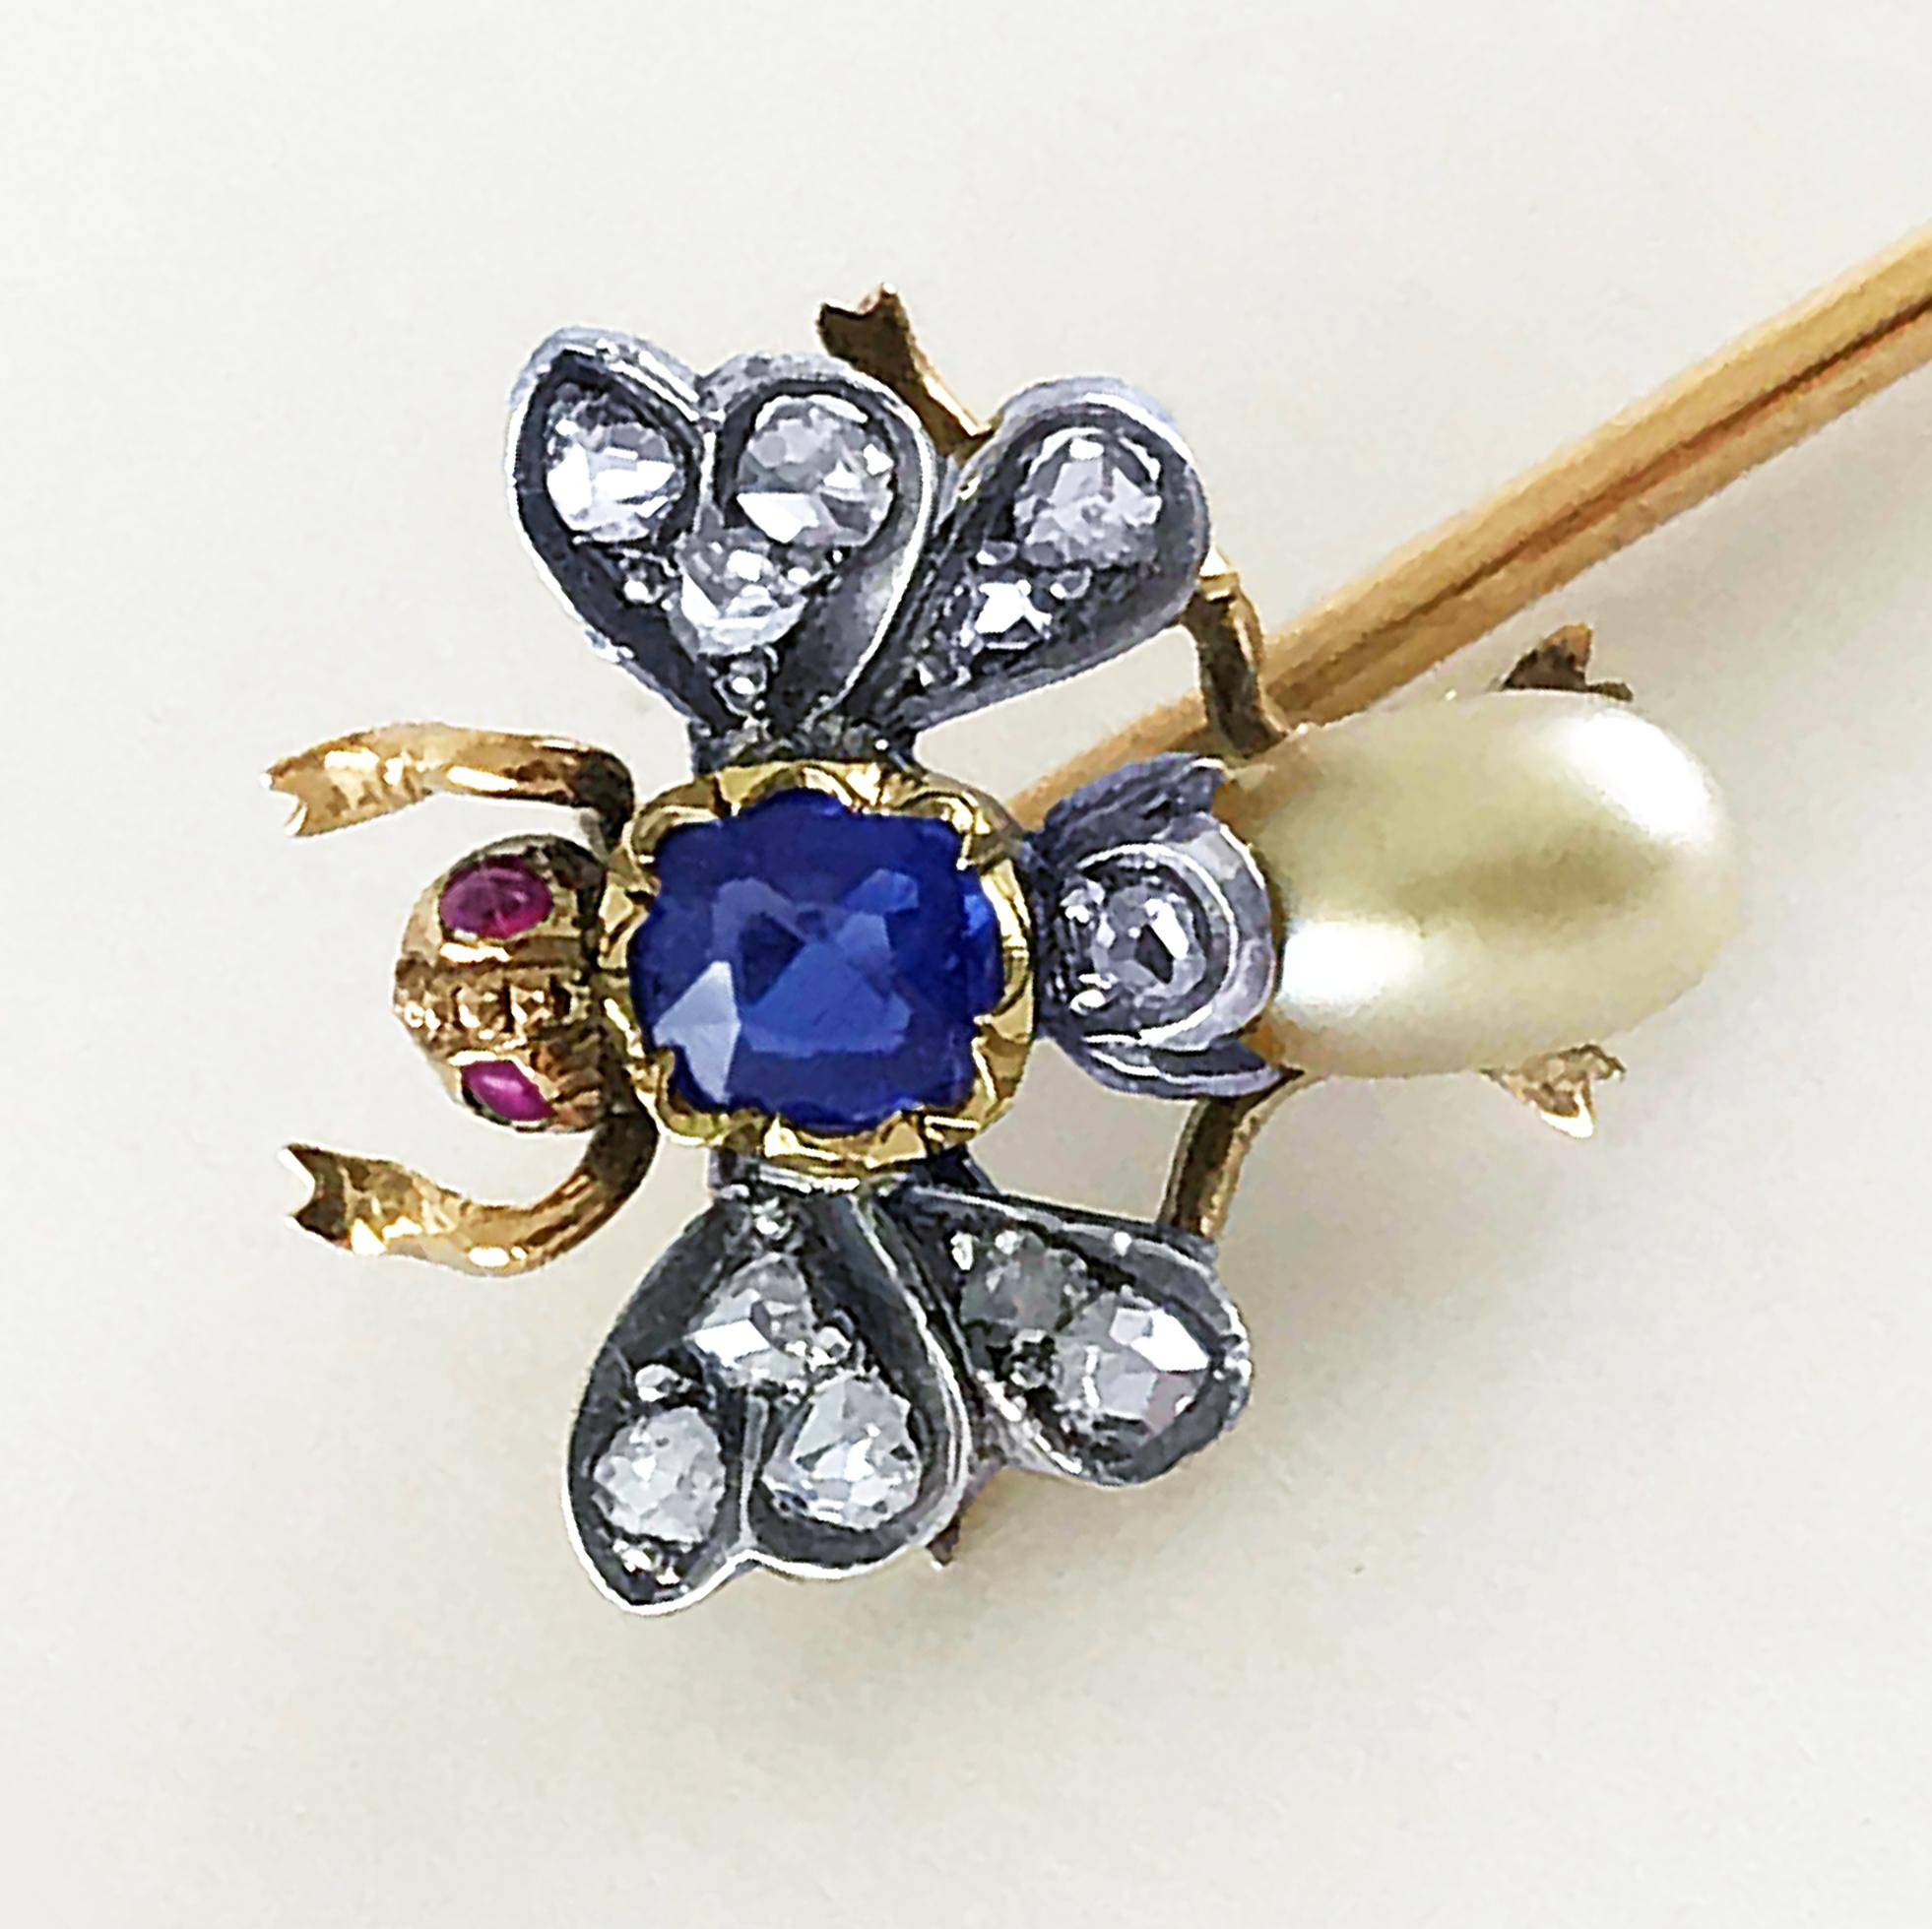 Insect Stick pin in the form of a bee (bug) with ruby eyes, sapphire body, diamond wings and pearl circa 1880.

18ct yellow gold and silver set, intricately formed and set with 2 well matched rubies (natural no heat treatment) for eyes and Rose cut